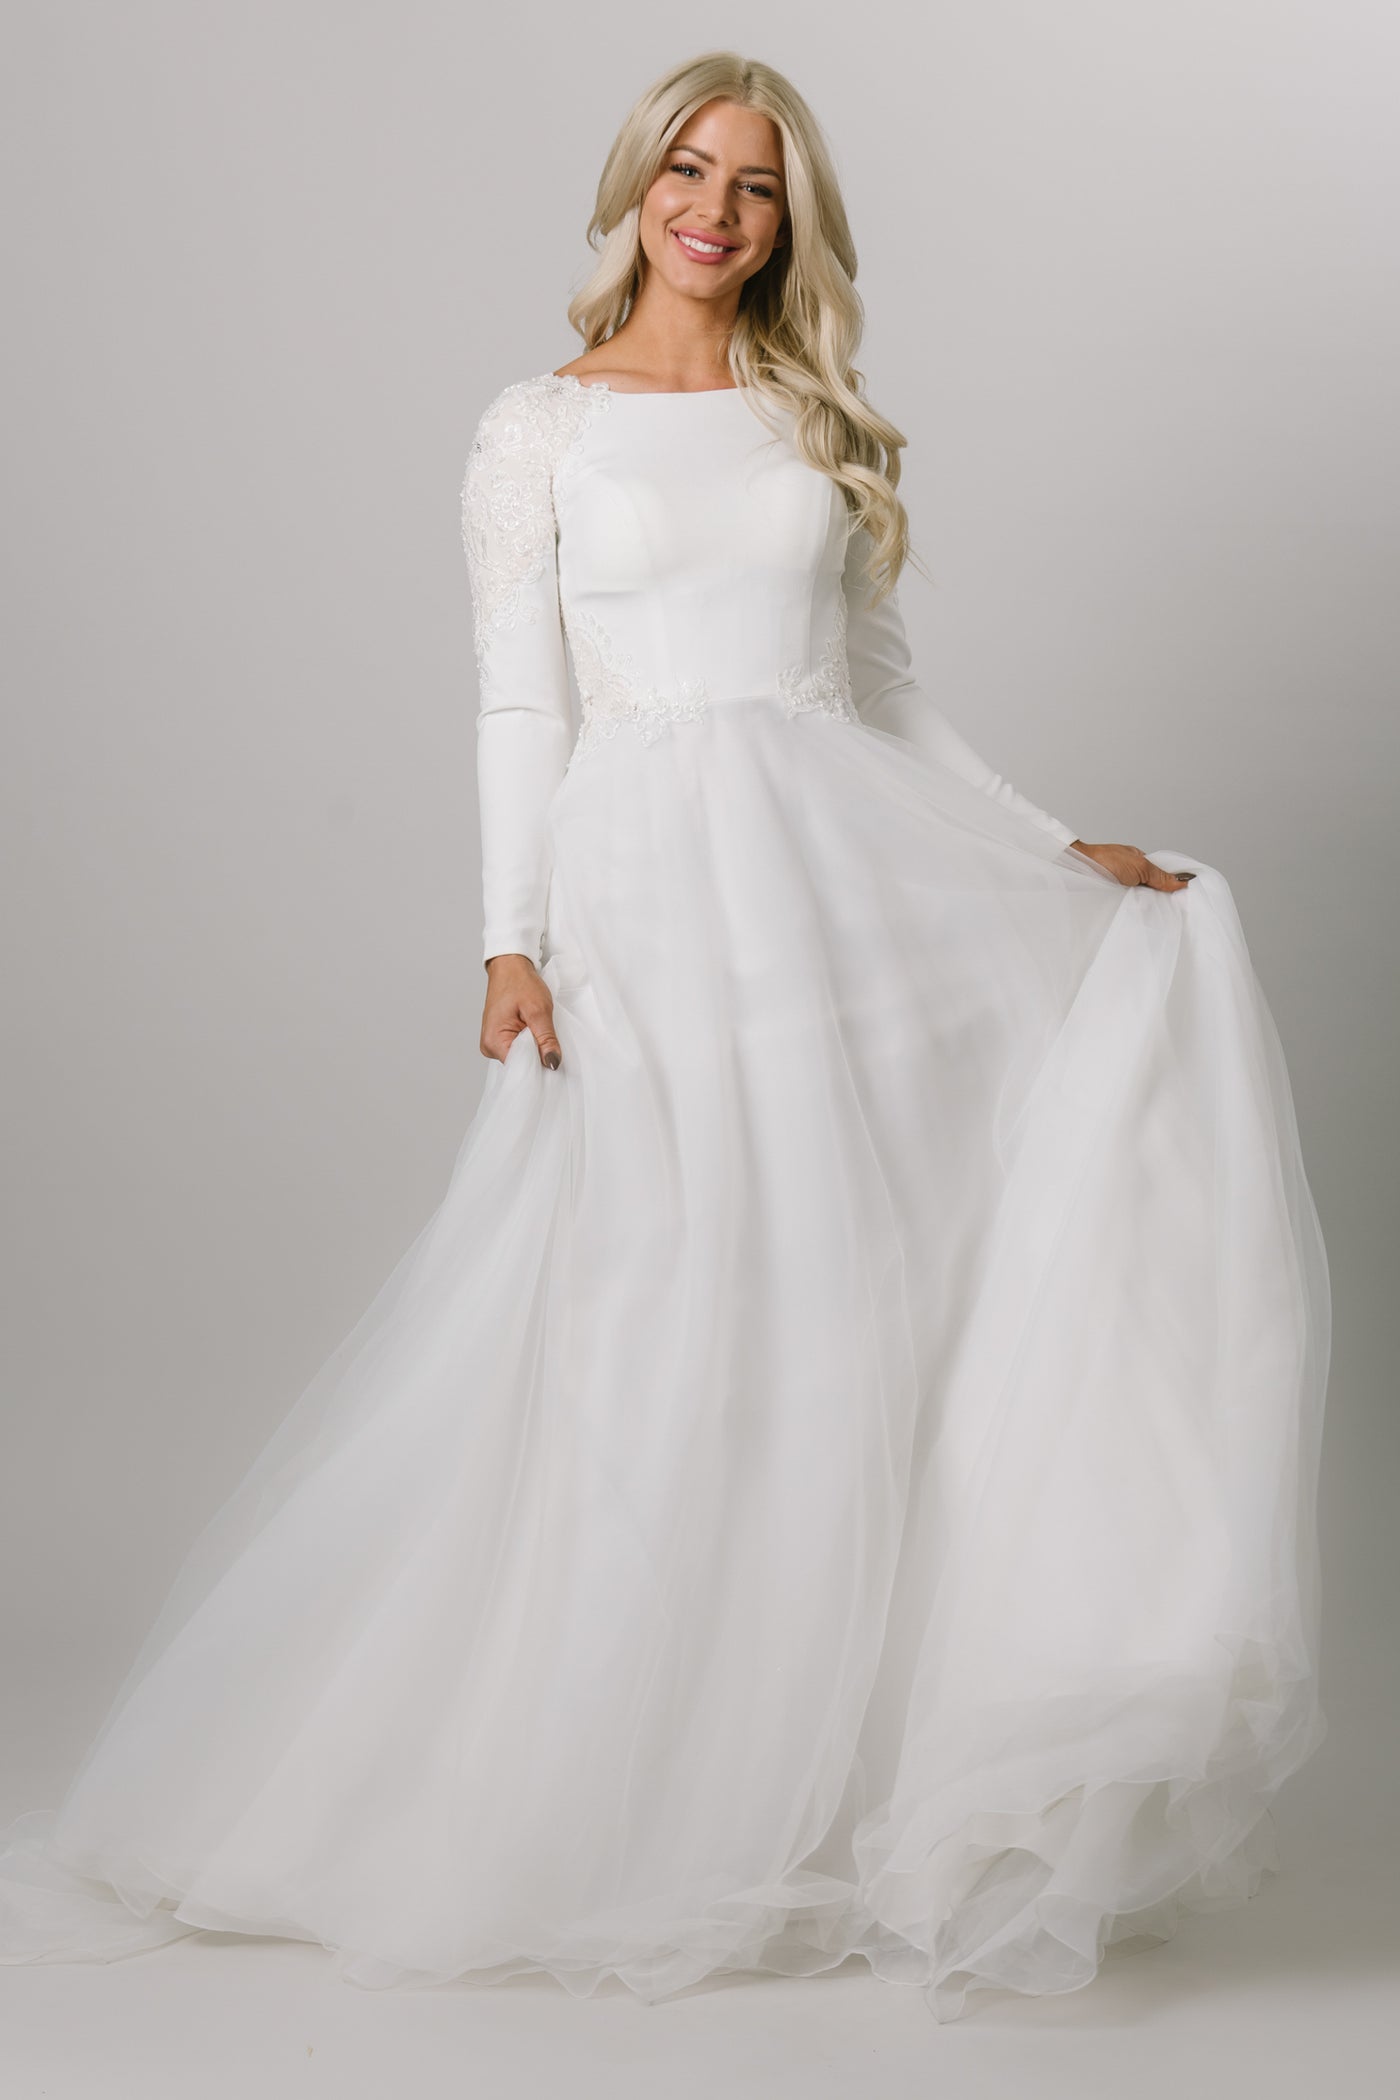 Moments Made Bridal wedding dress with long sleeves. This modest wedding dress has a high scoop neckline and a-lin fit. This is a perfect wedding dress for those cooler months. It has a zipper covered by buttons down the back.